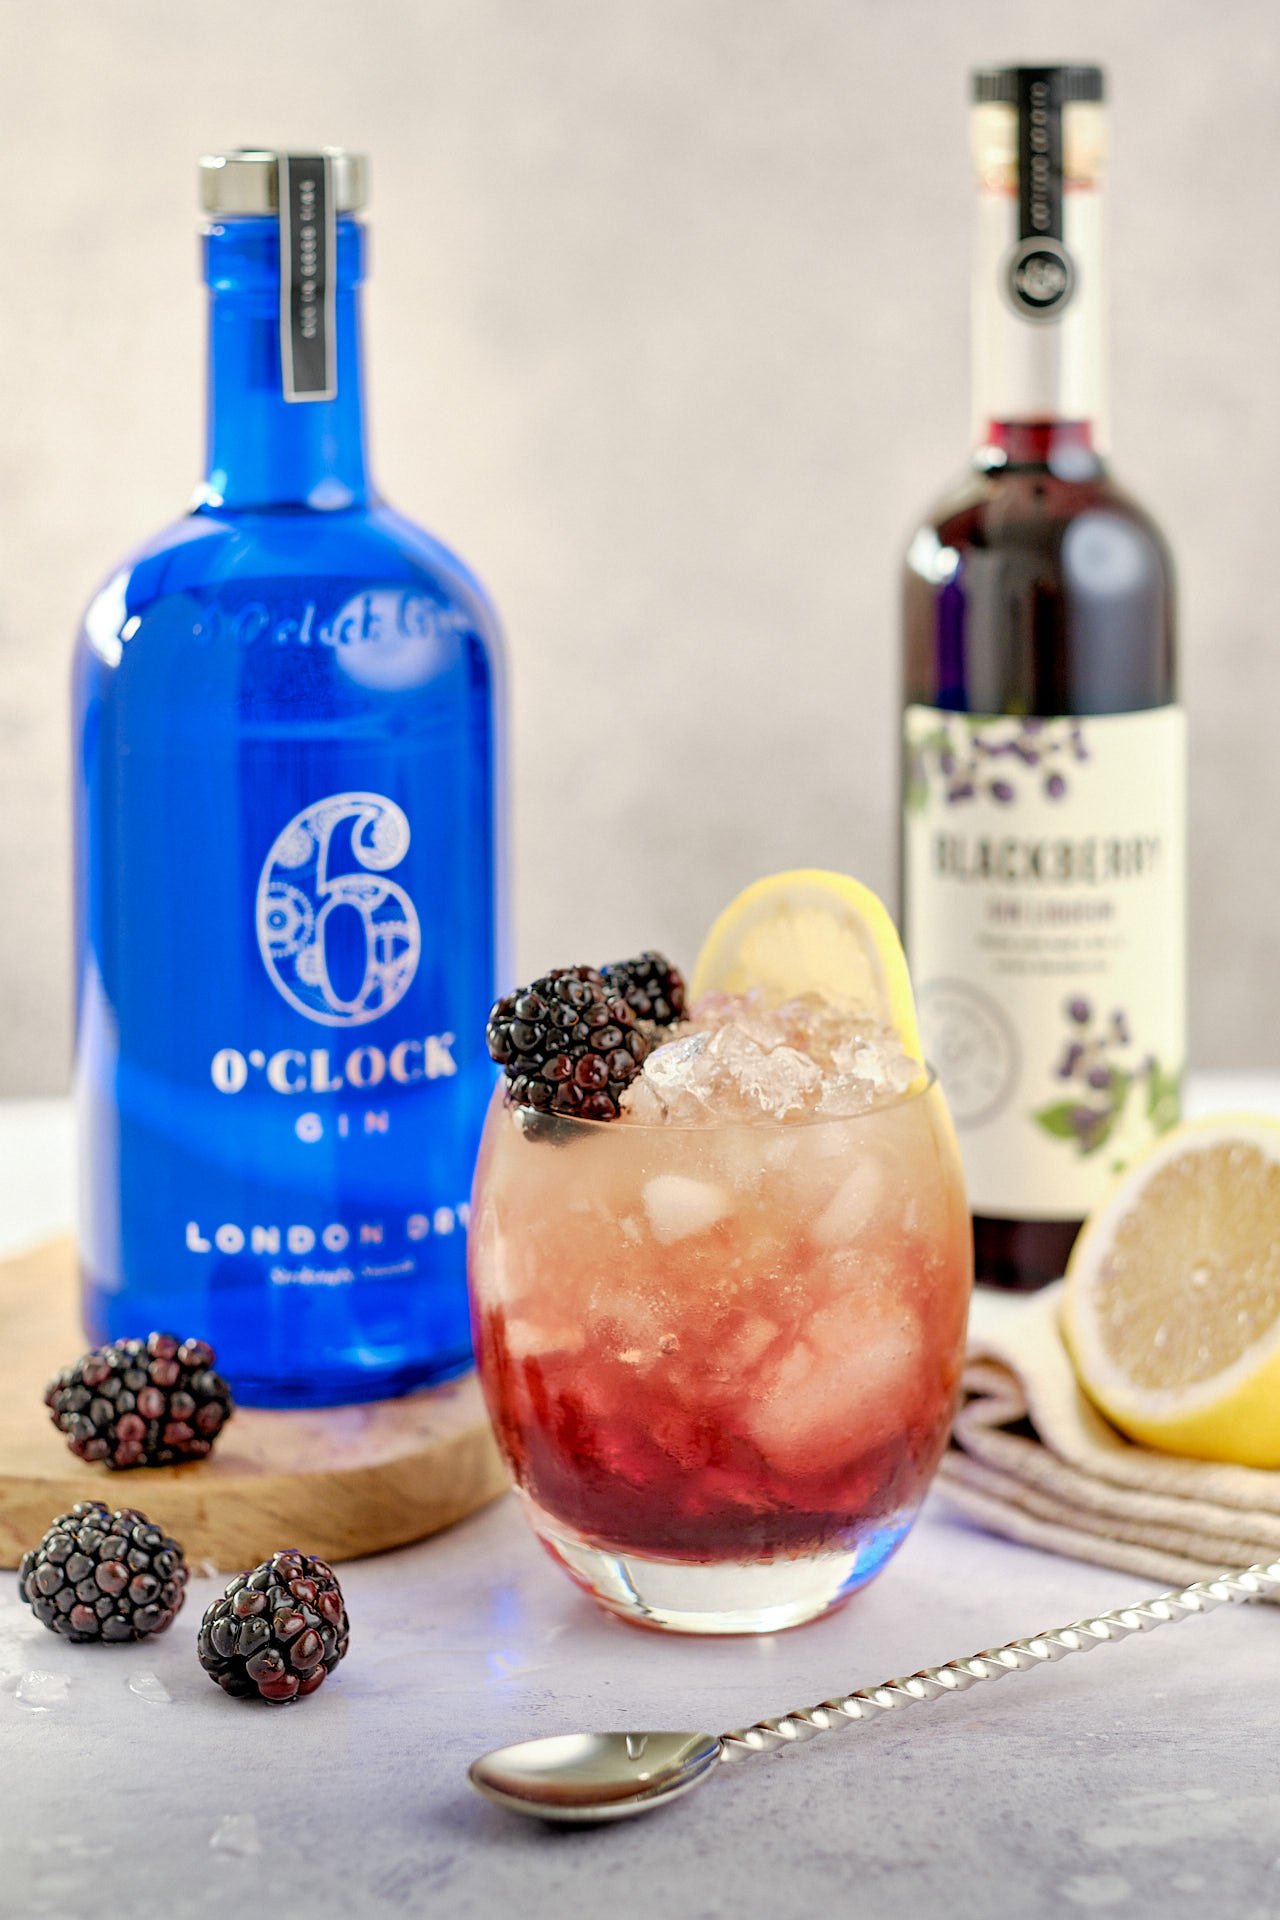 The Bramble Cocktail - made with gin, lemon and blackberry liqueur.